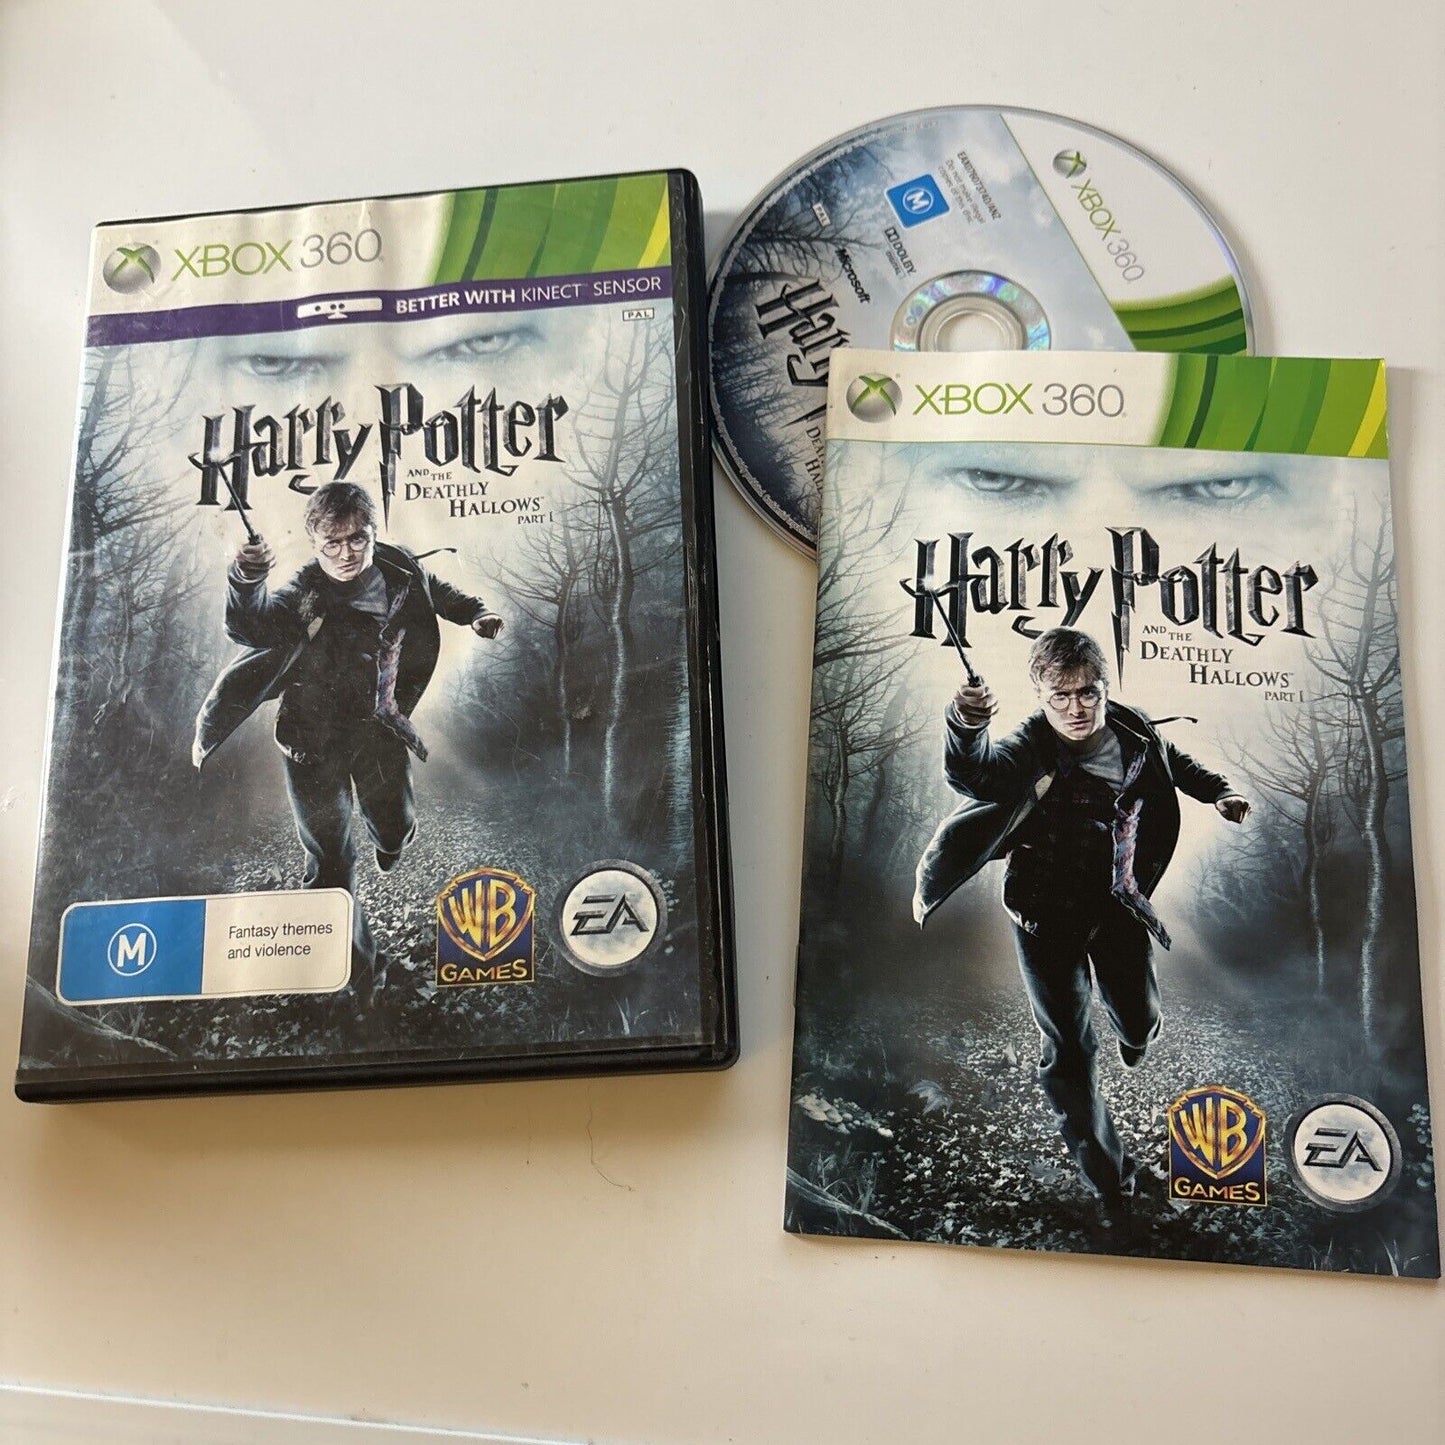 Harry Potter & the Deathly Hallows Part 1 - Microsoft Xbox 360 - PAL - Manual